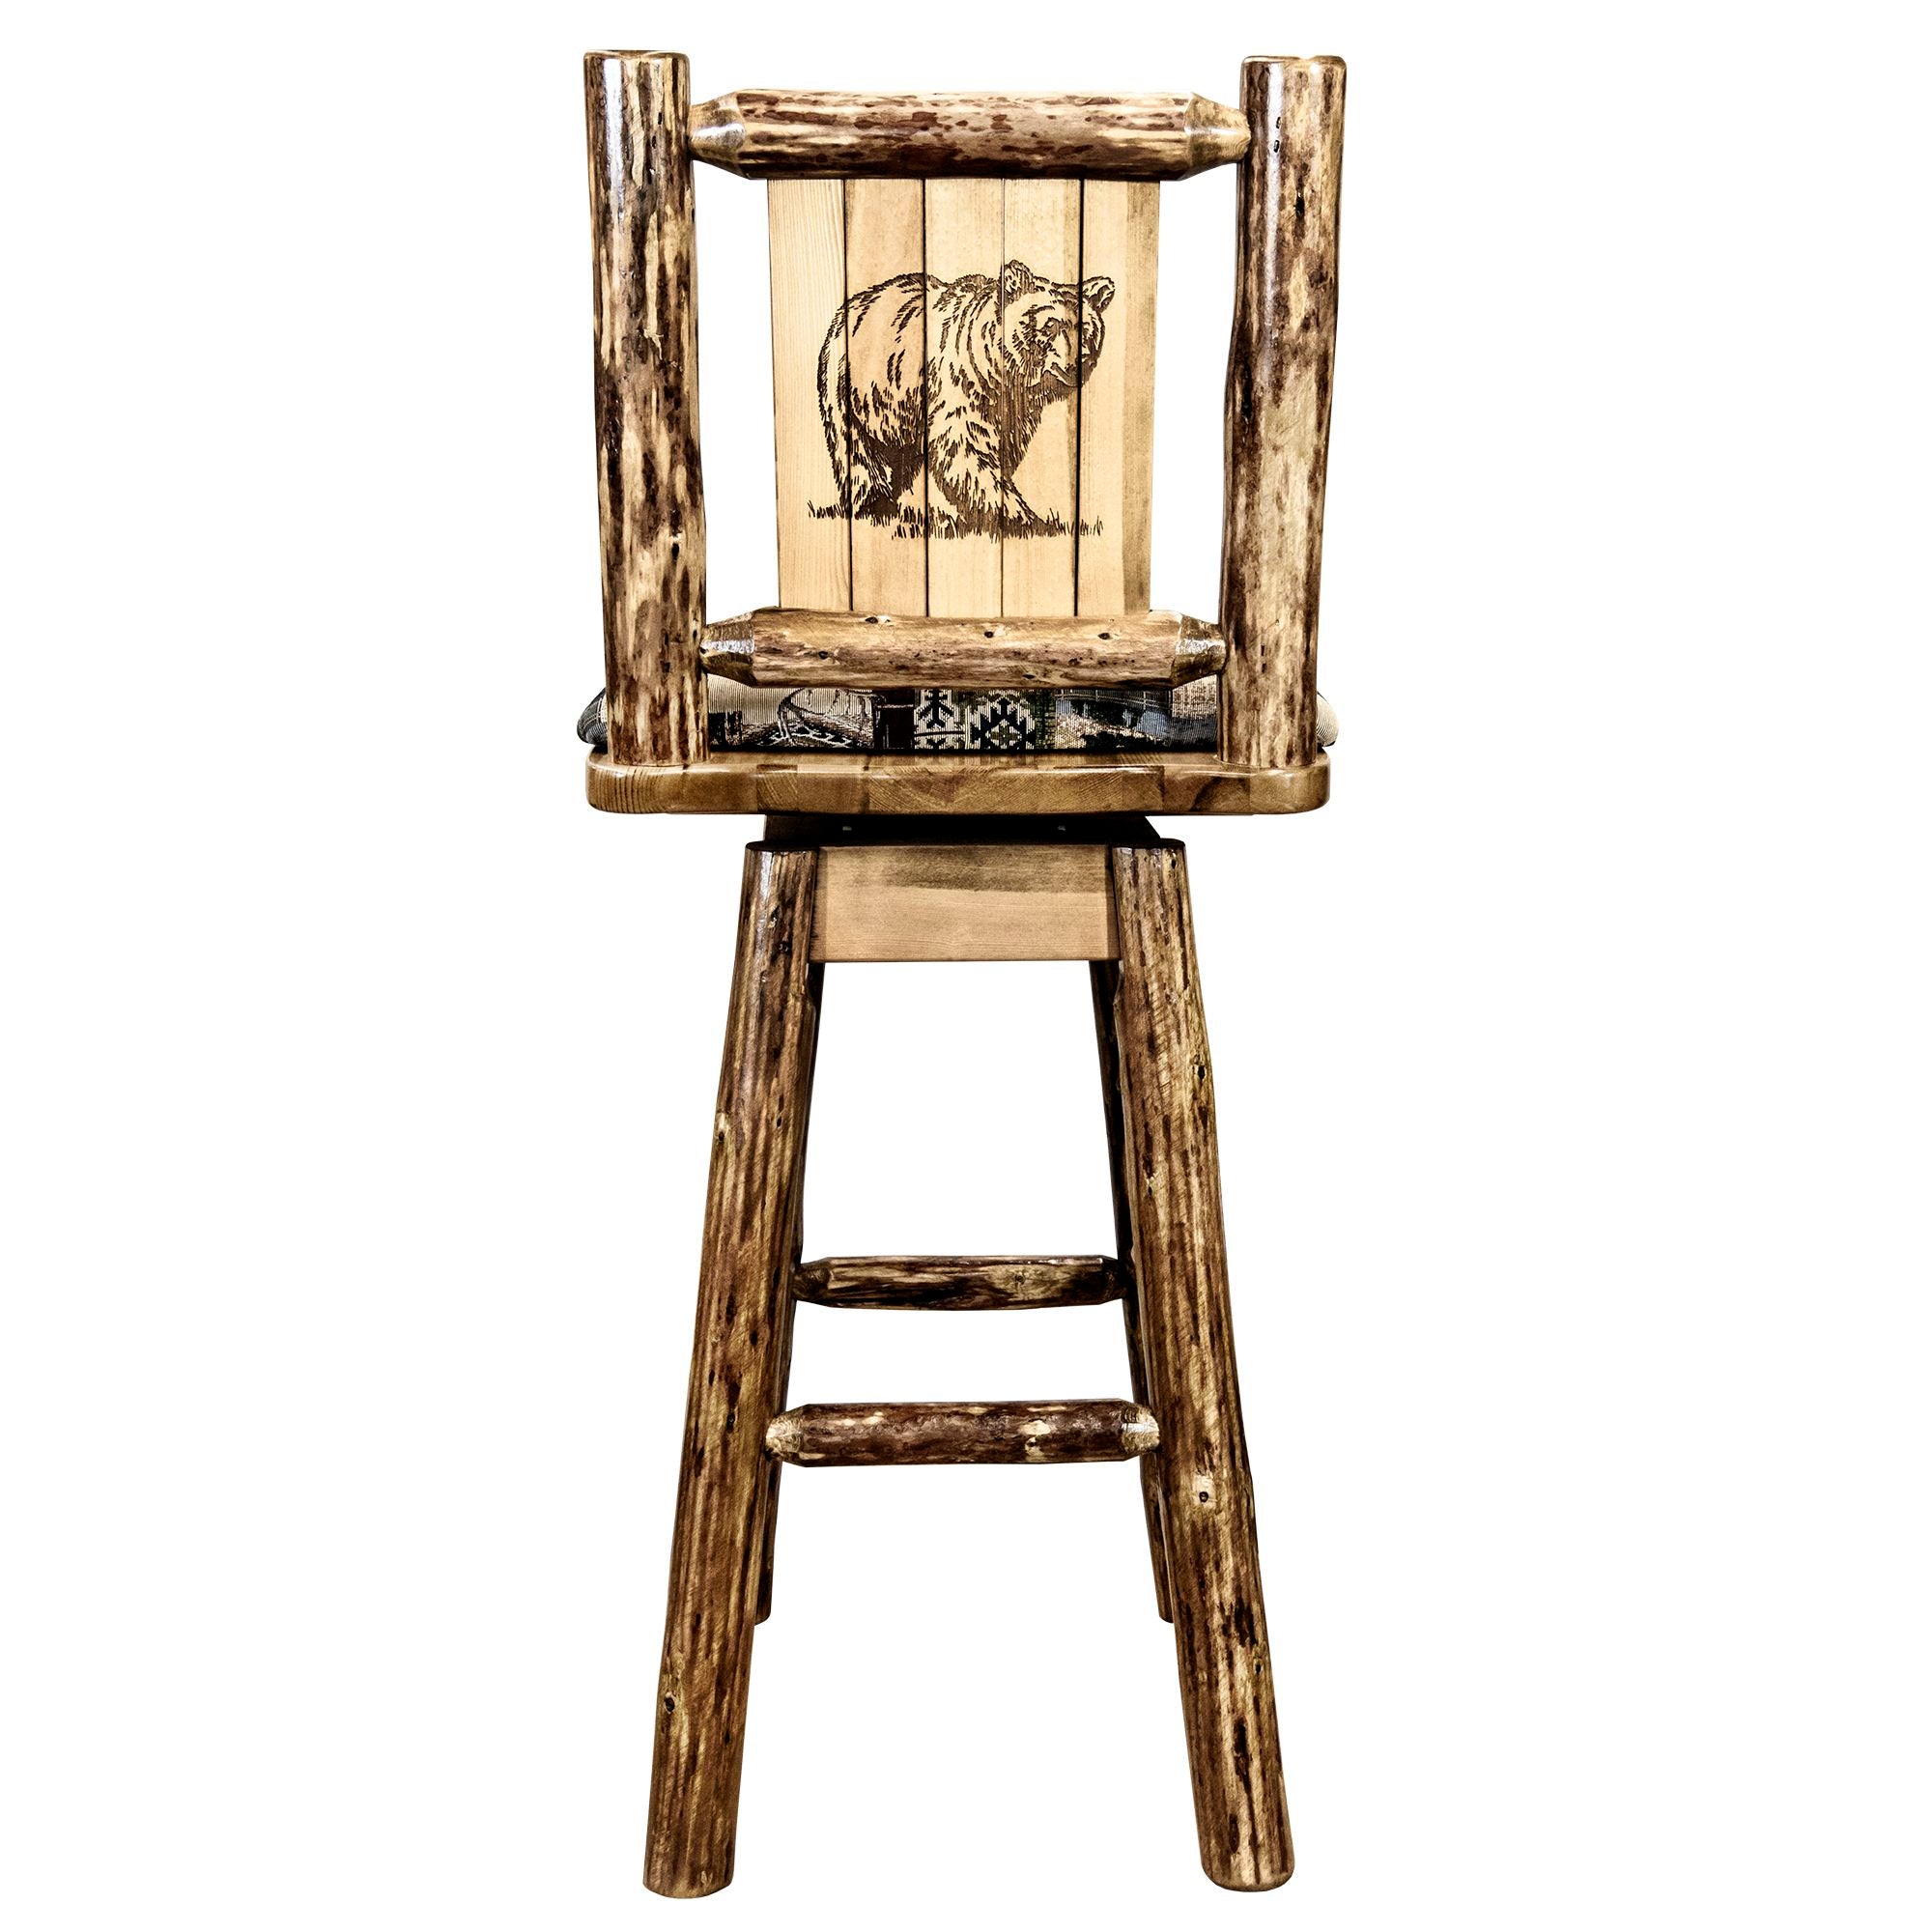 montana glacier country collection barstool with back swivel woodland pattern upholstery with laser engraved bear design mwgcbswsnrwoodlbear